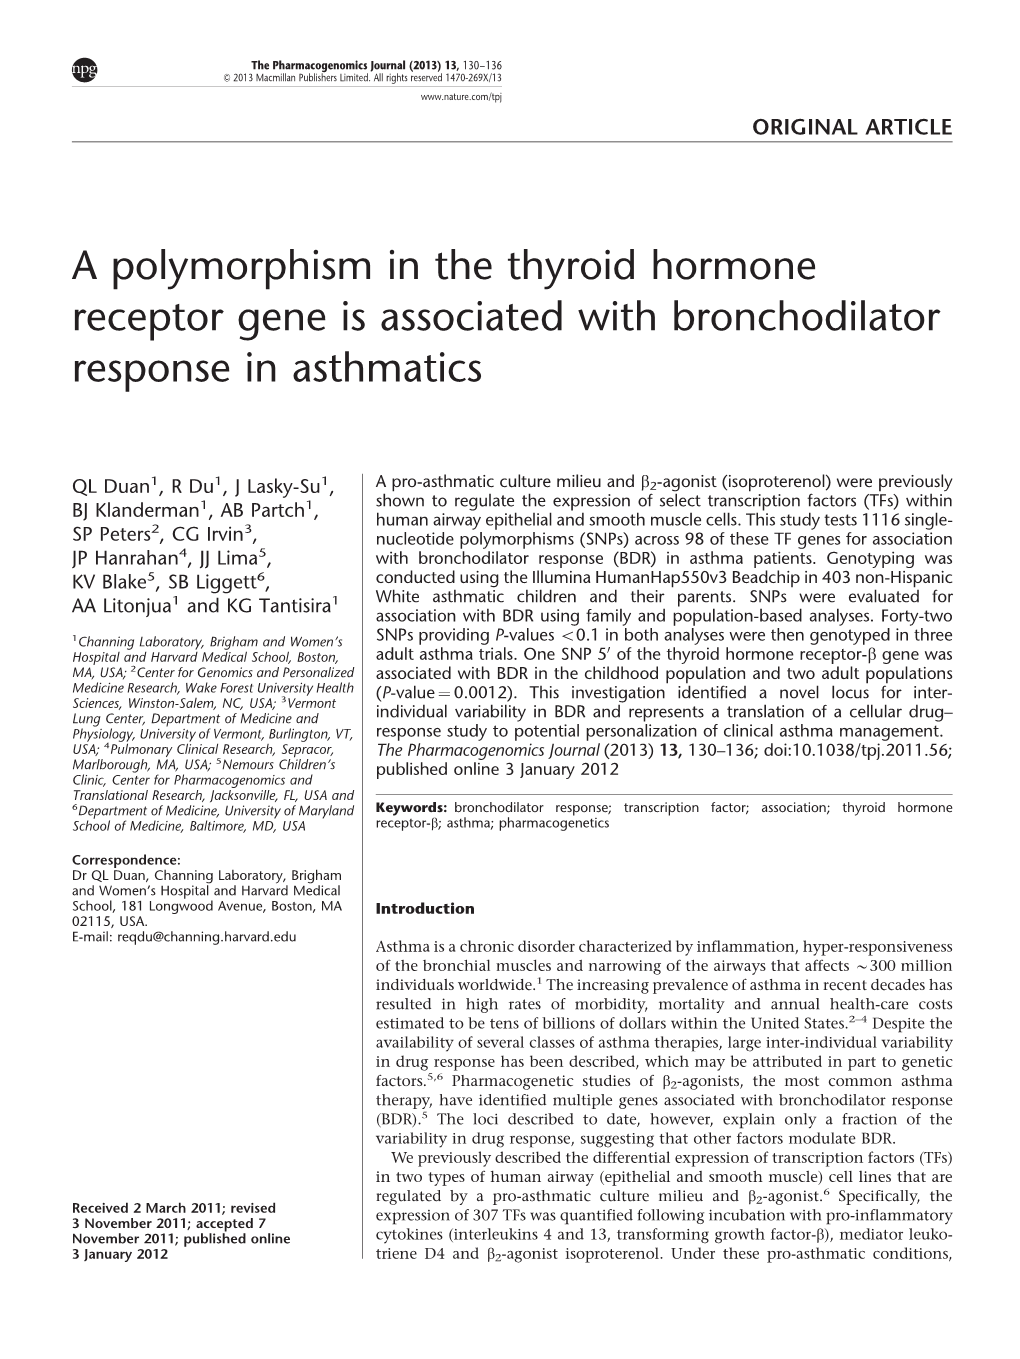 A Polymorphism in the Thyroid Hormone Receptor Gene Is Associated with Bronchodilator Response in Asthmatics